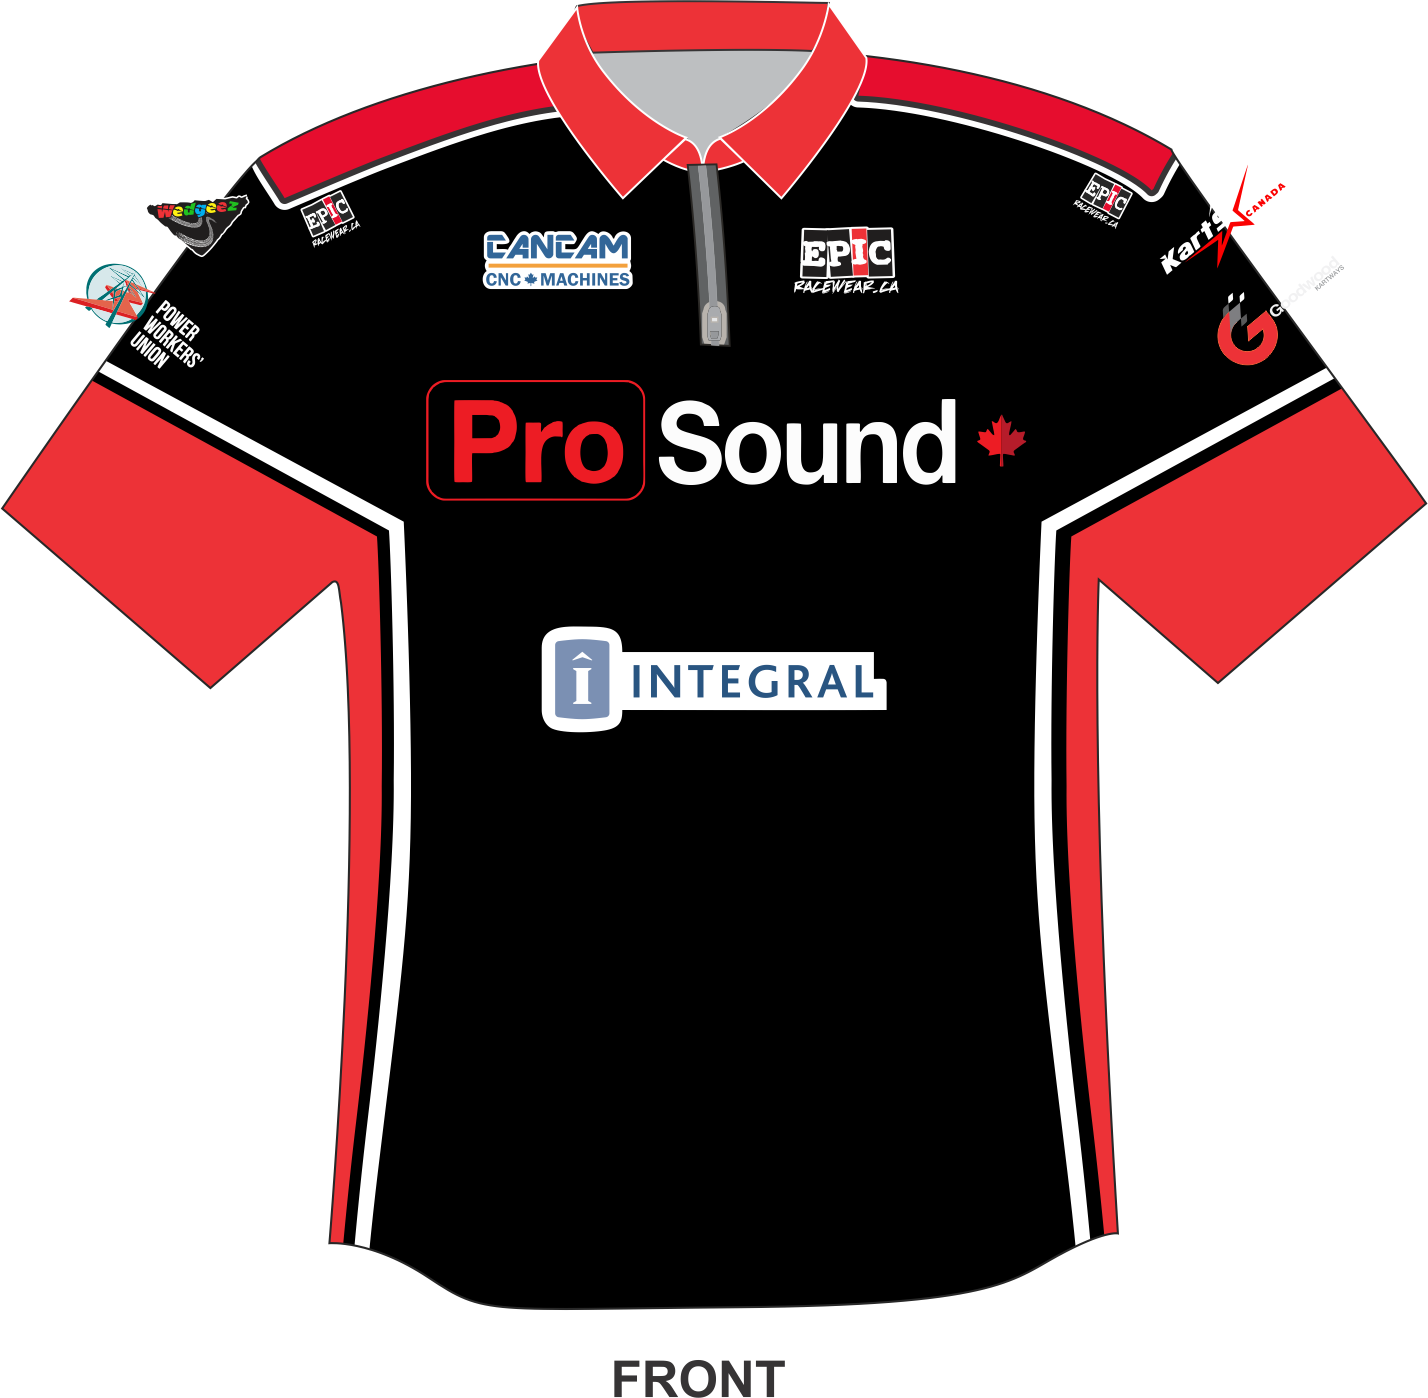 2022 Ladies' Official Pro Sound Racing Crew / Pit shirt